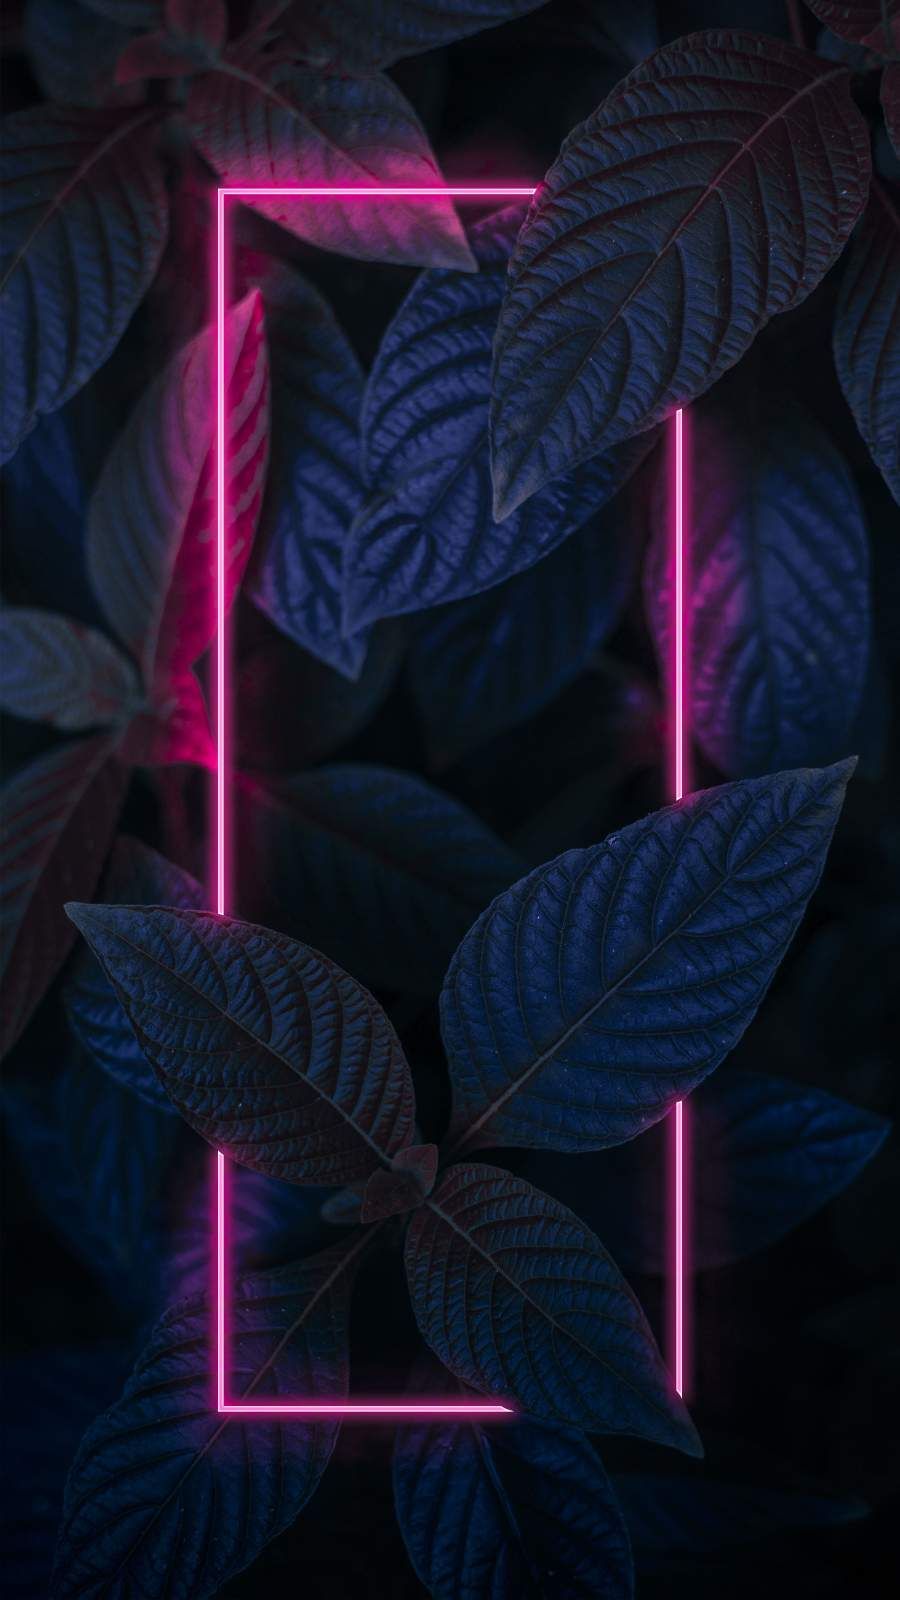 Iphone wallpapers for iphone iphone iphone x iphone xr iphone plus high quality wallpapers ipâ galaxy wallpaper neon wallpaper neon light wallpaper